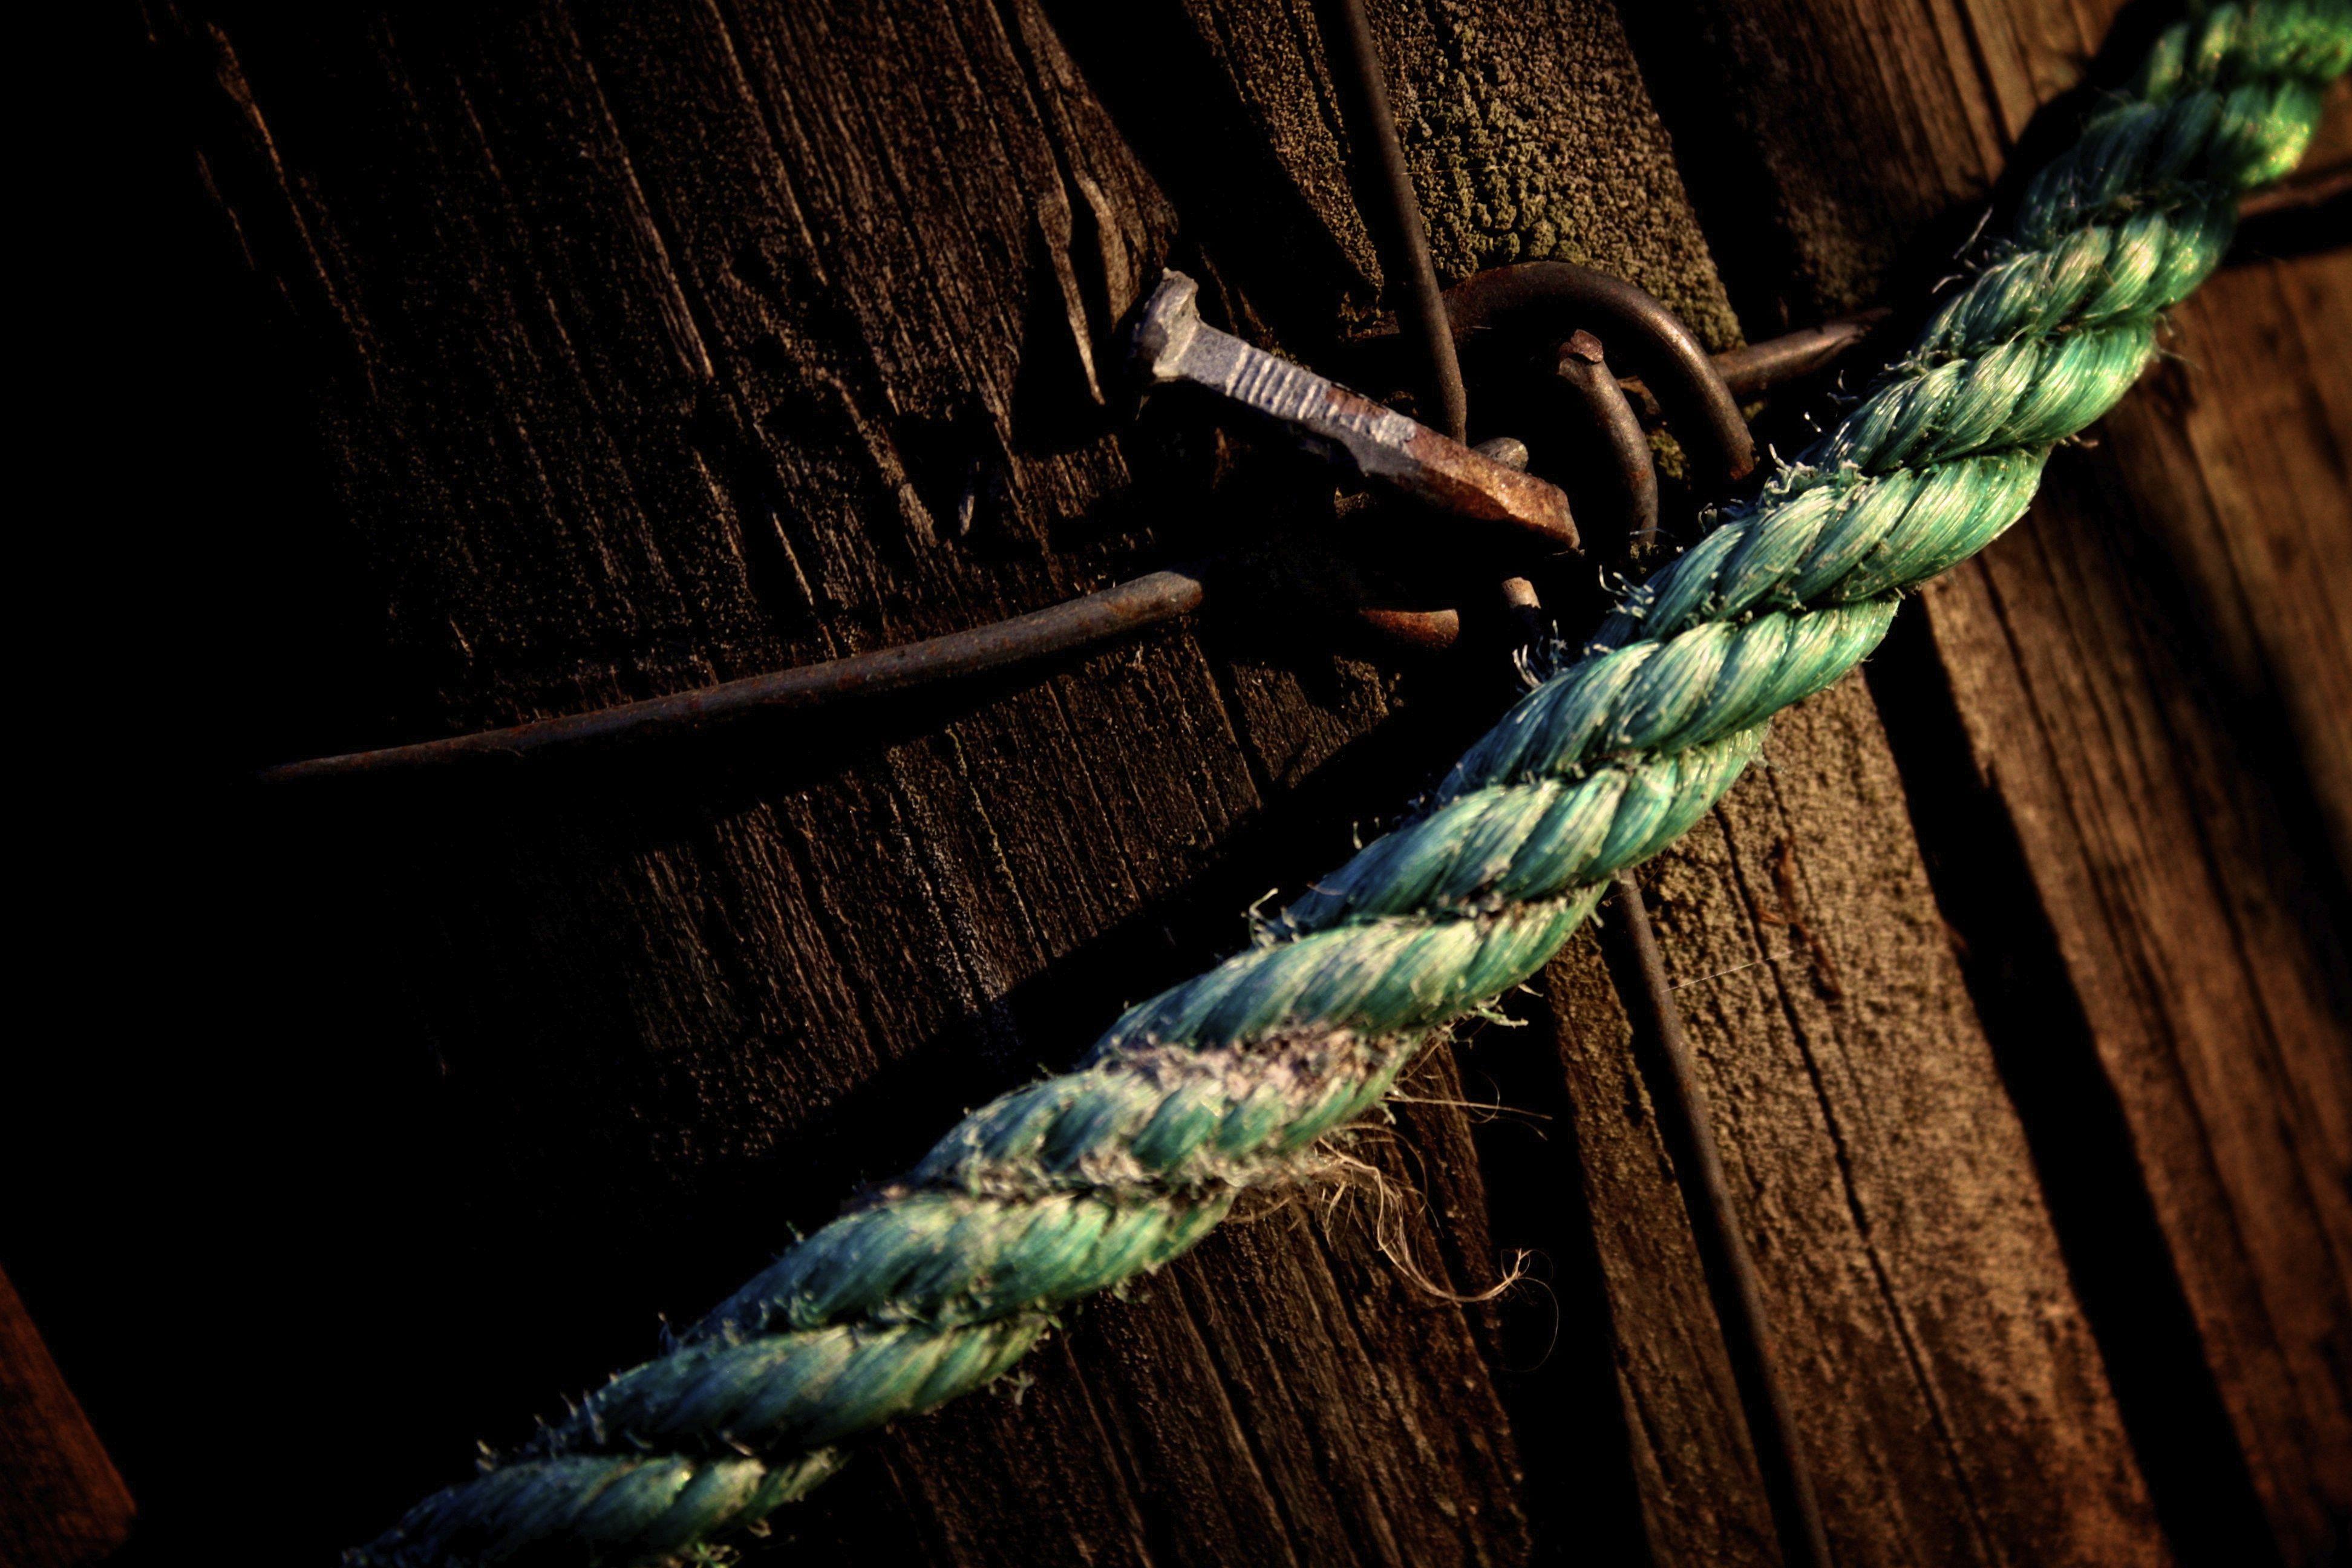 Rustic Rope Wide Wallpaper 52996 3888x2592 px